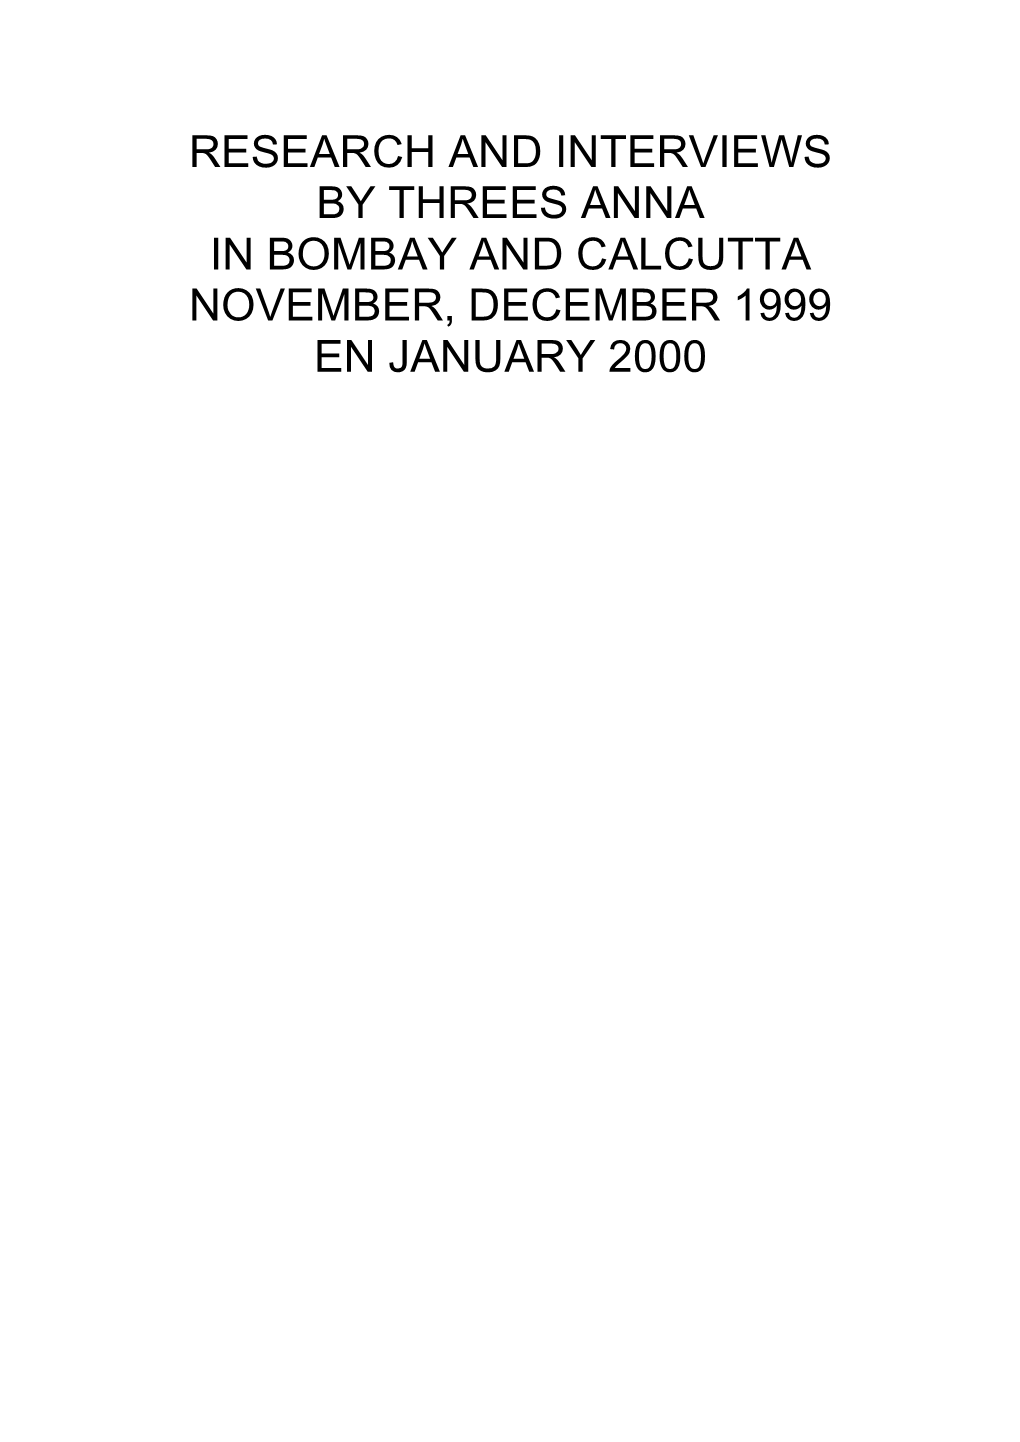 Research and Interviews by Threes Anna in Bombay and Calcutta November, December 1999 En January 2000